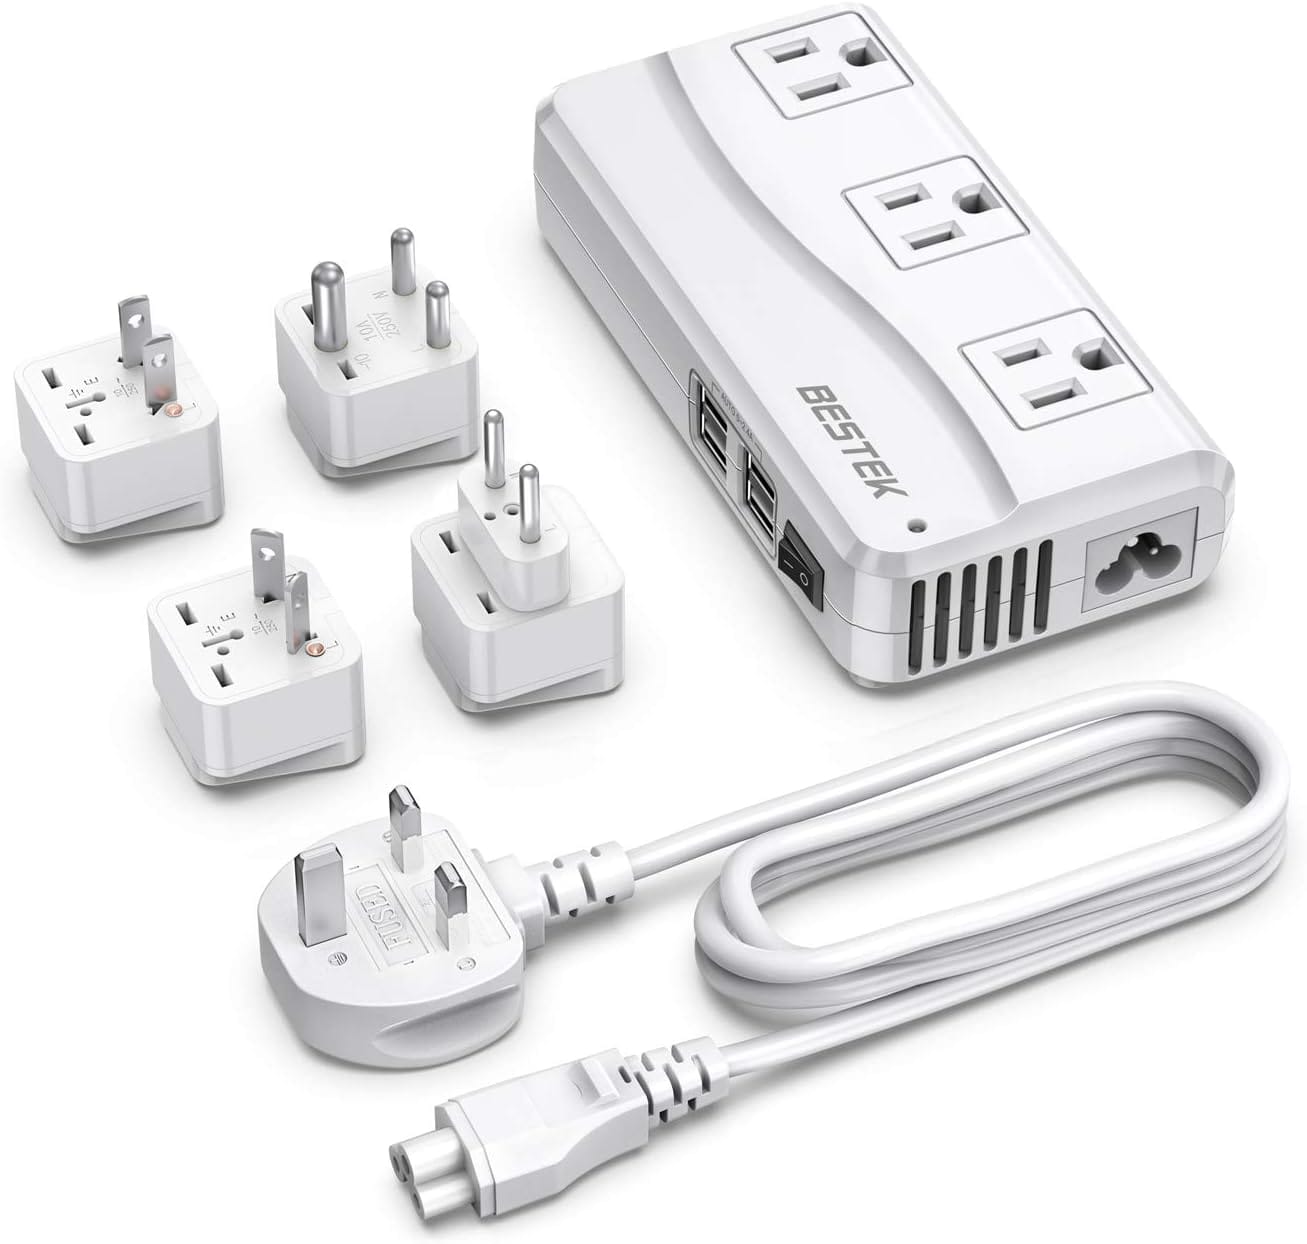 White Bestek international electrical power adapters arranged in a product shot